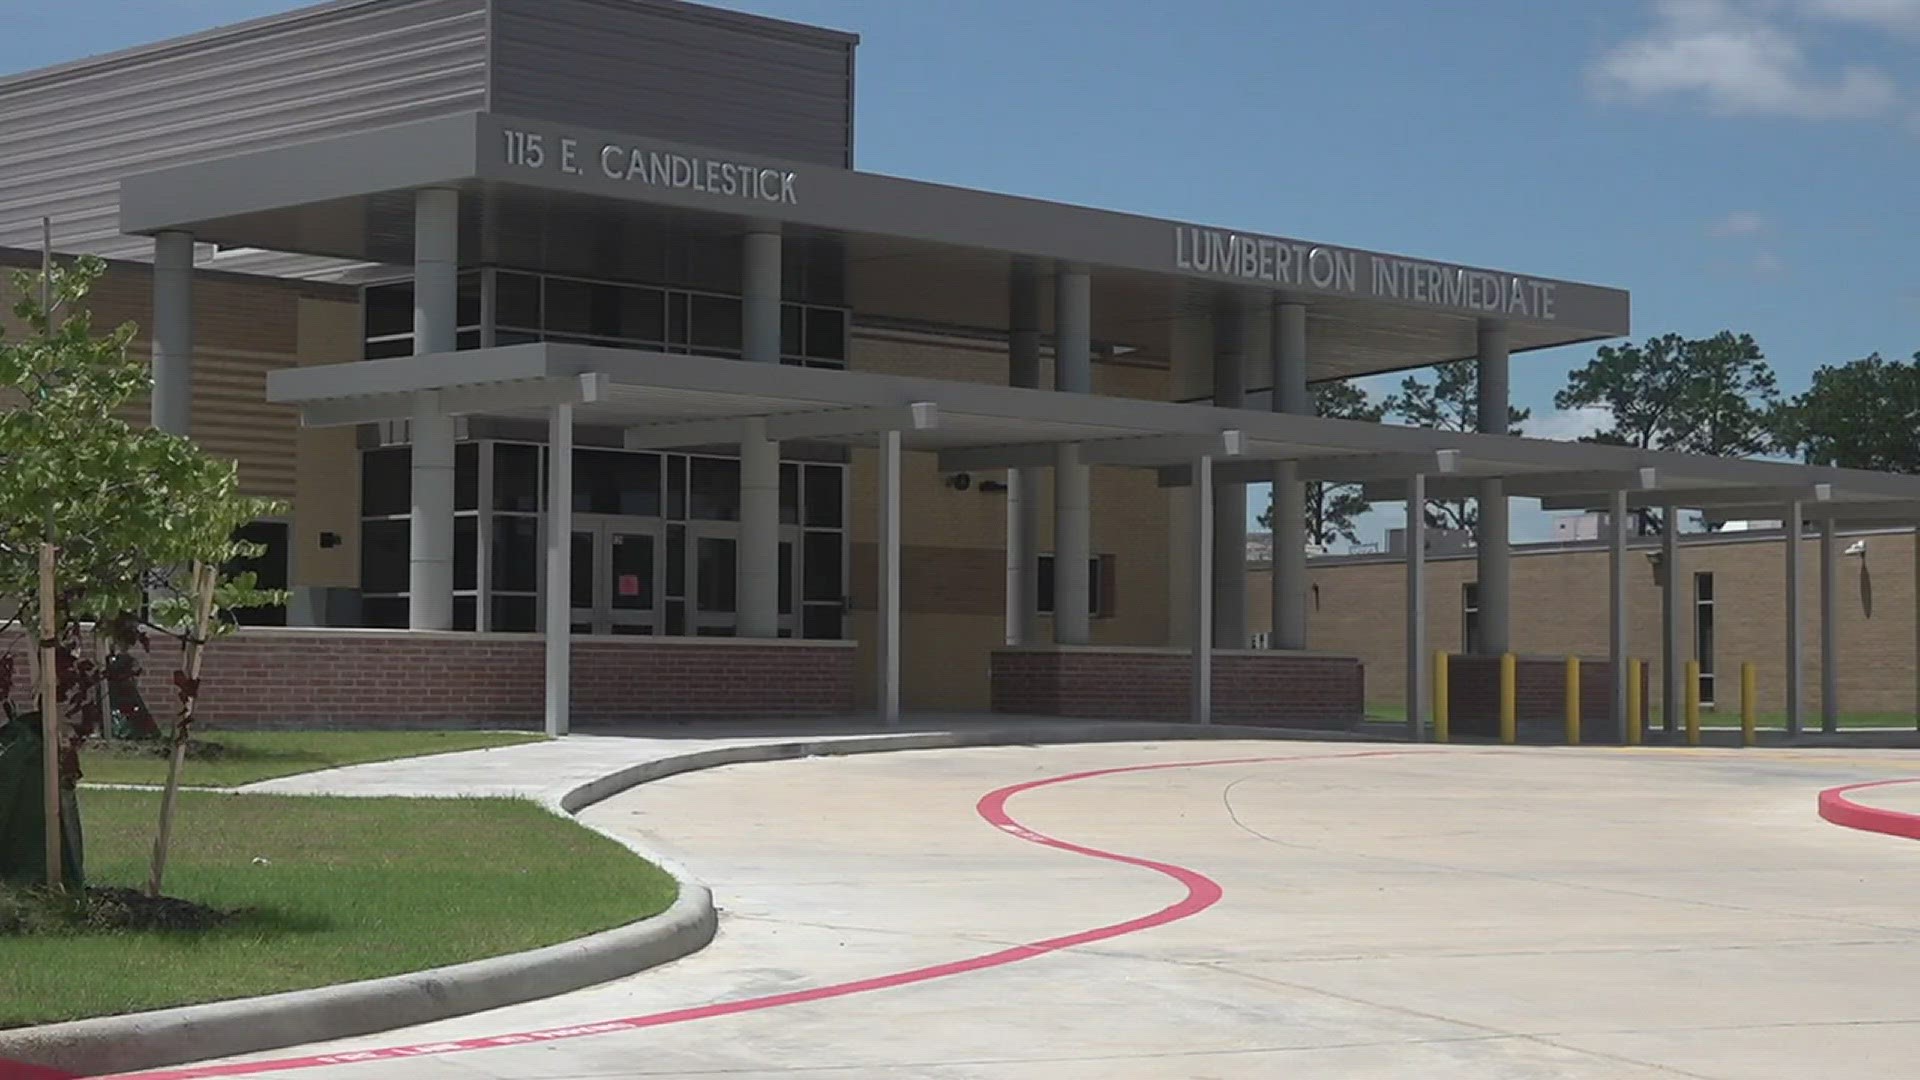 No expense was spared on the upgrades that were needed to keep up with all of the growth in the district according to the Lumberton ISD superintendent.